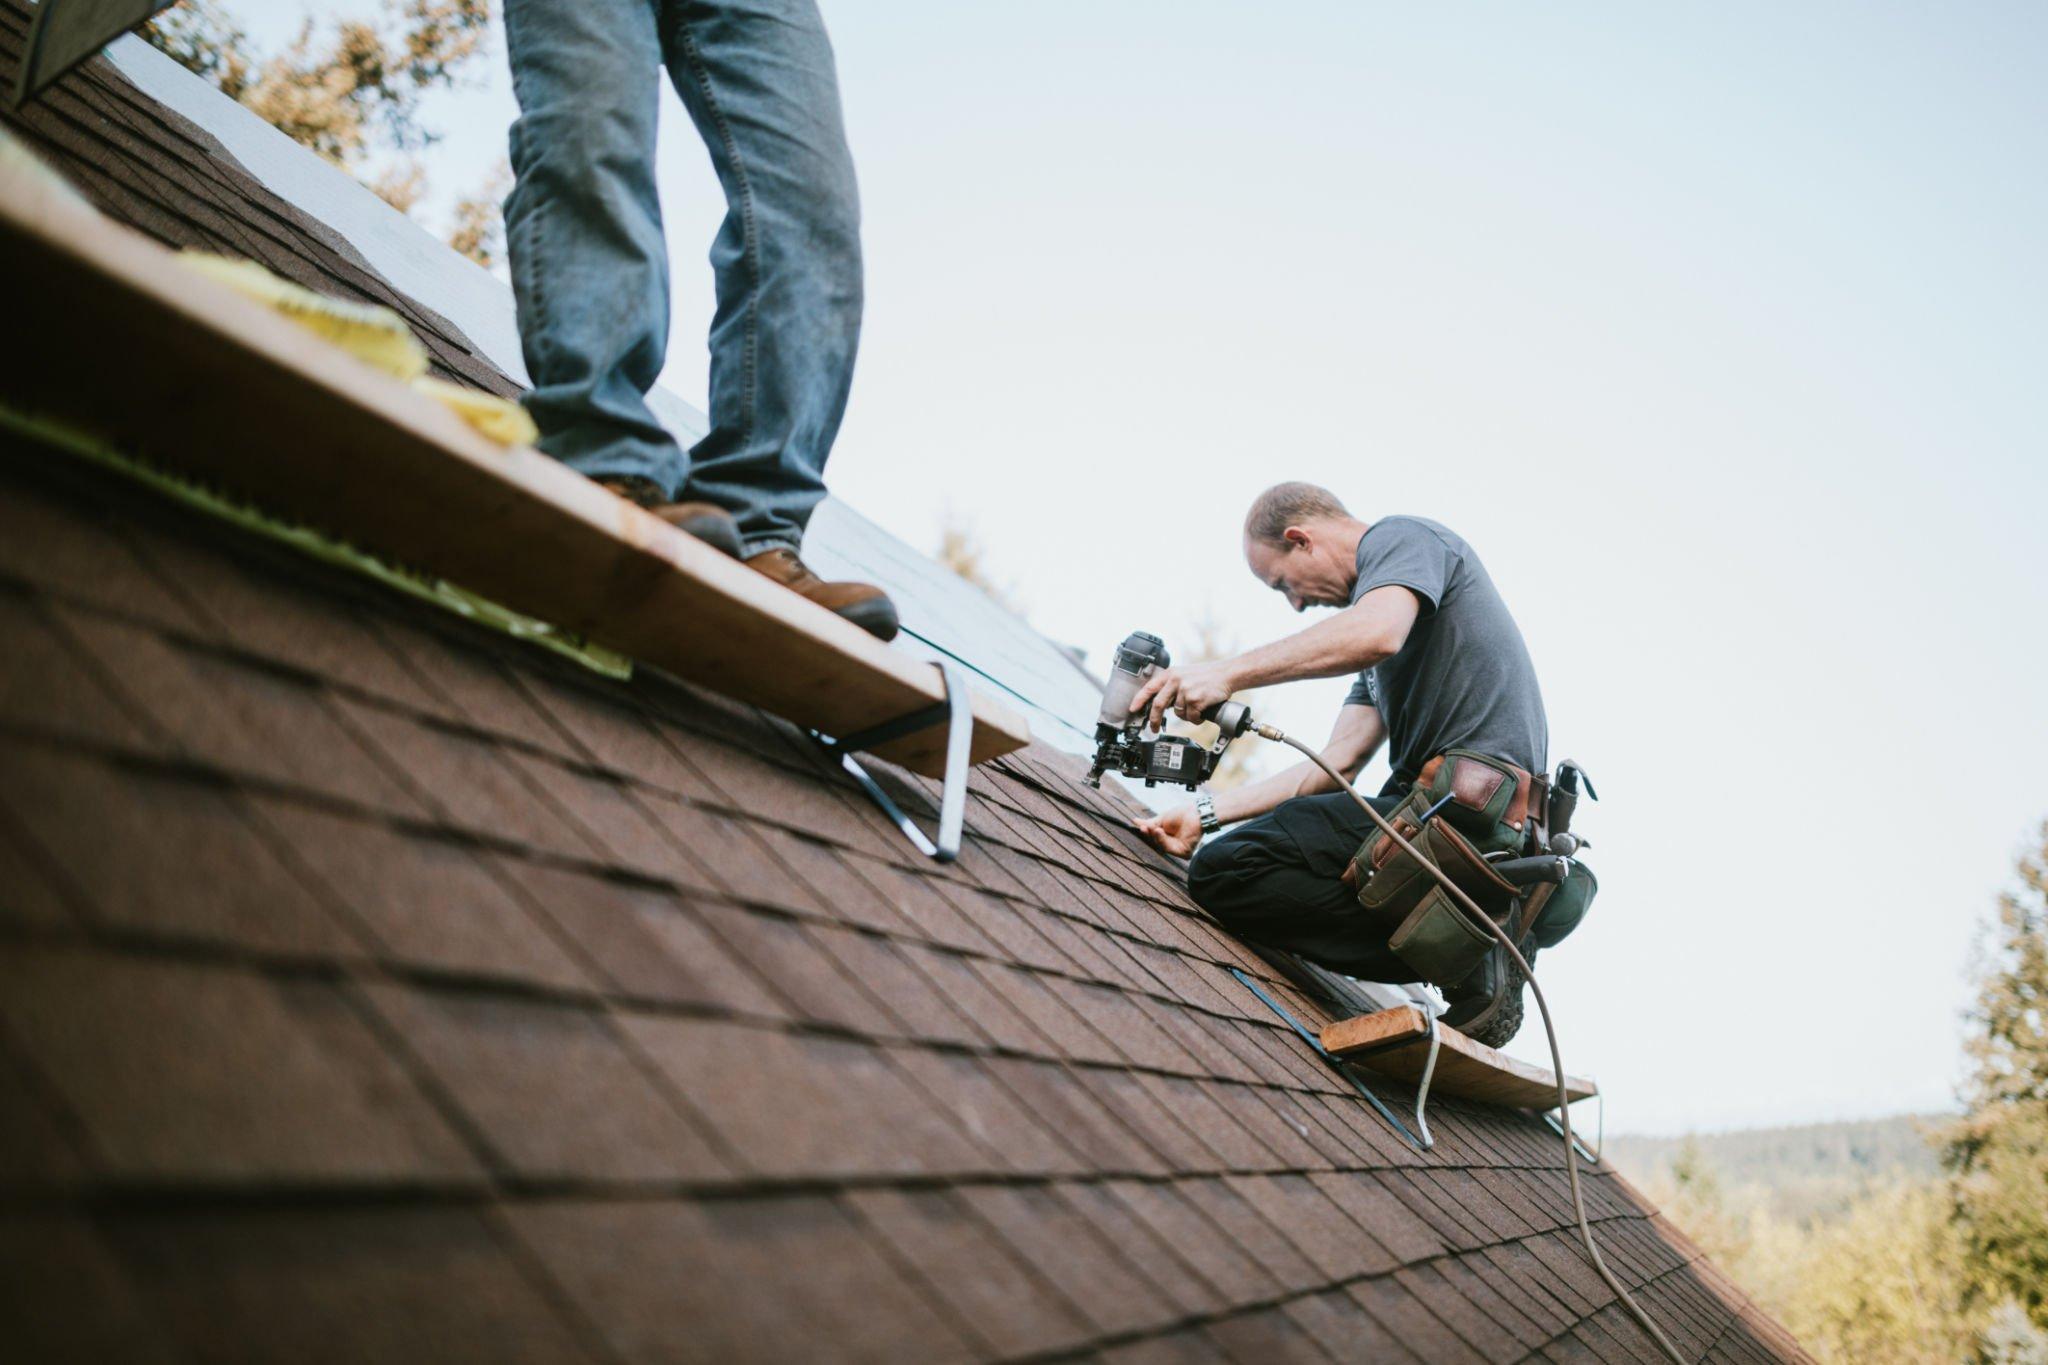 Roof Repair vs. Replacement: Making the Right Decision